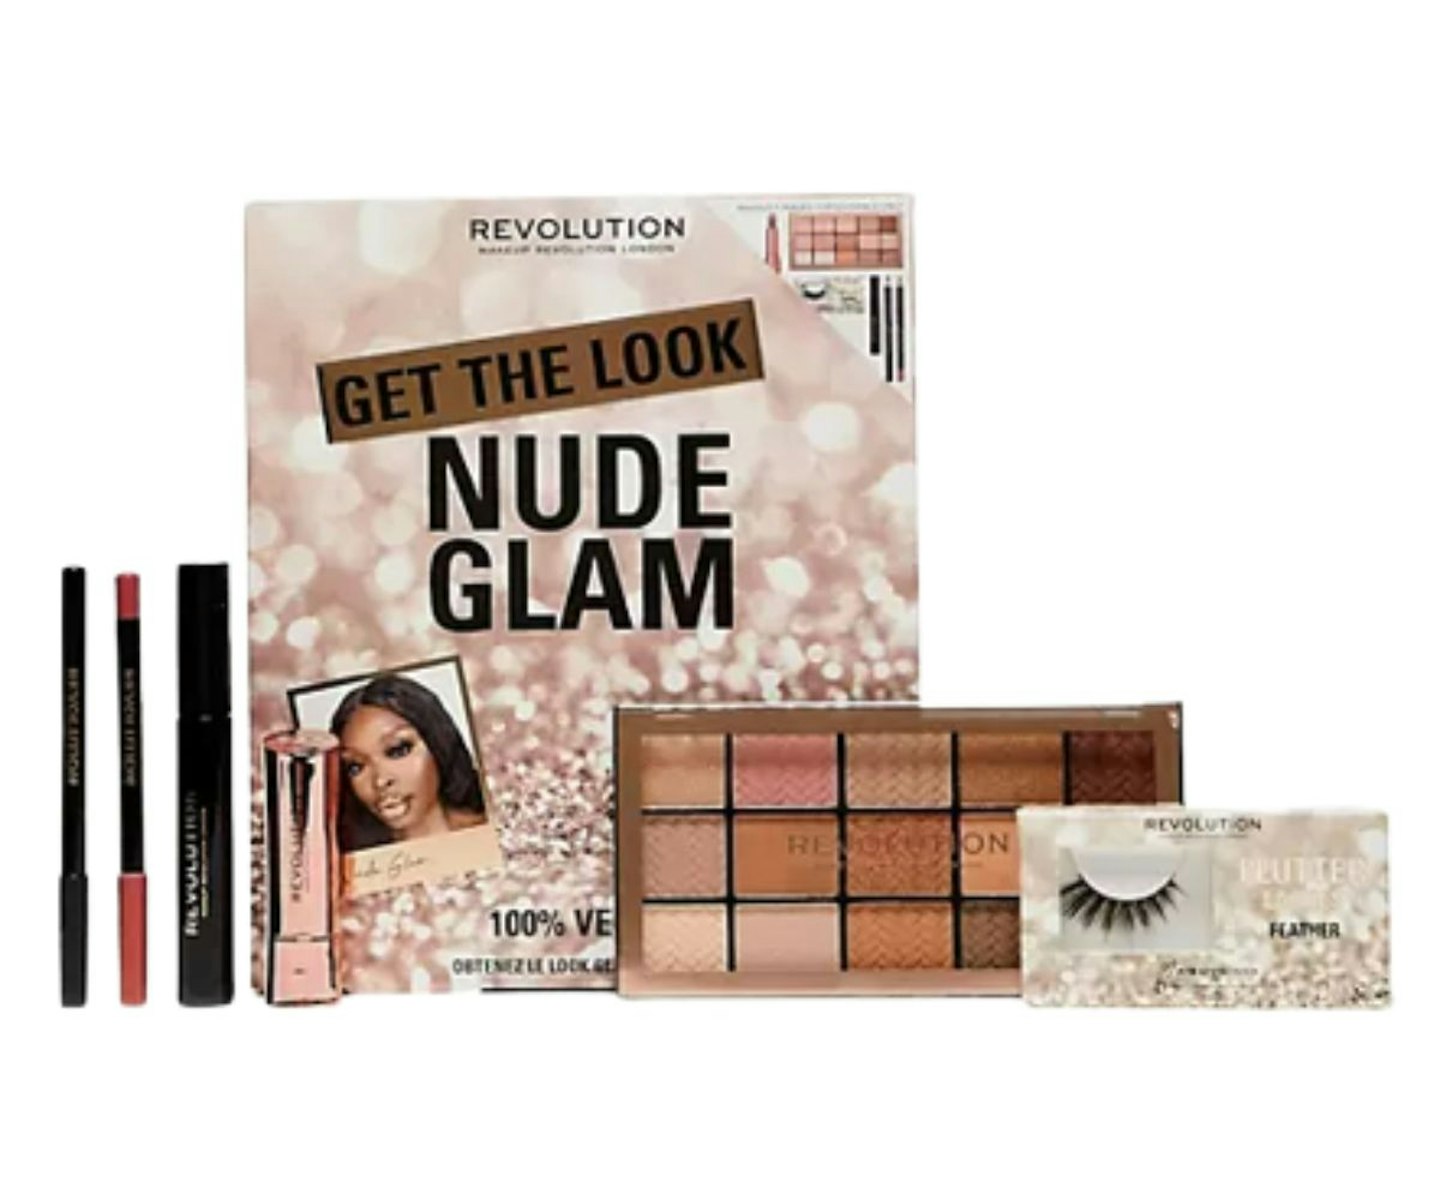 Revolution Get The Look: Nude Glam